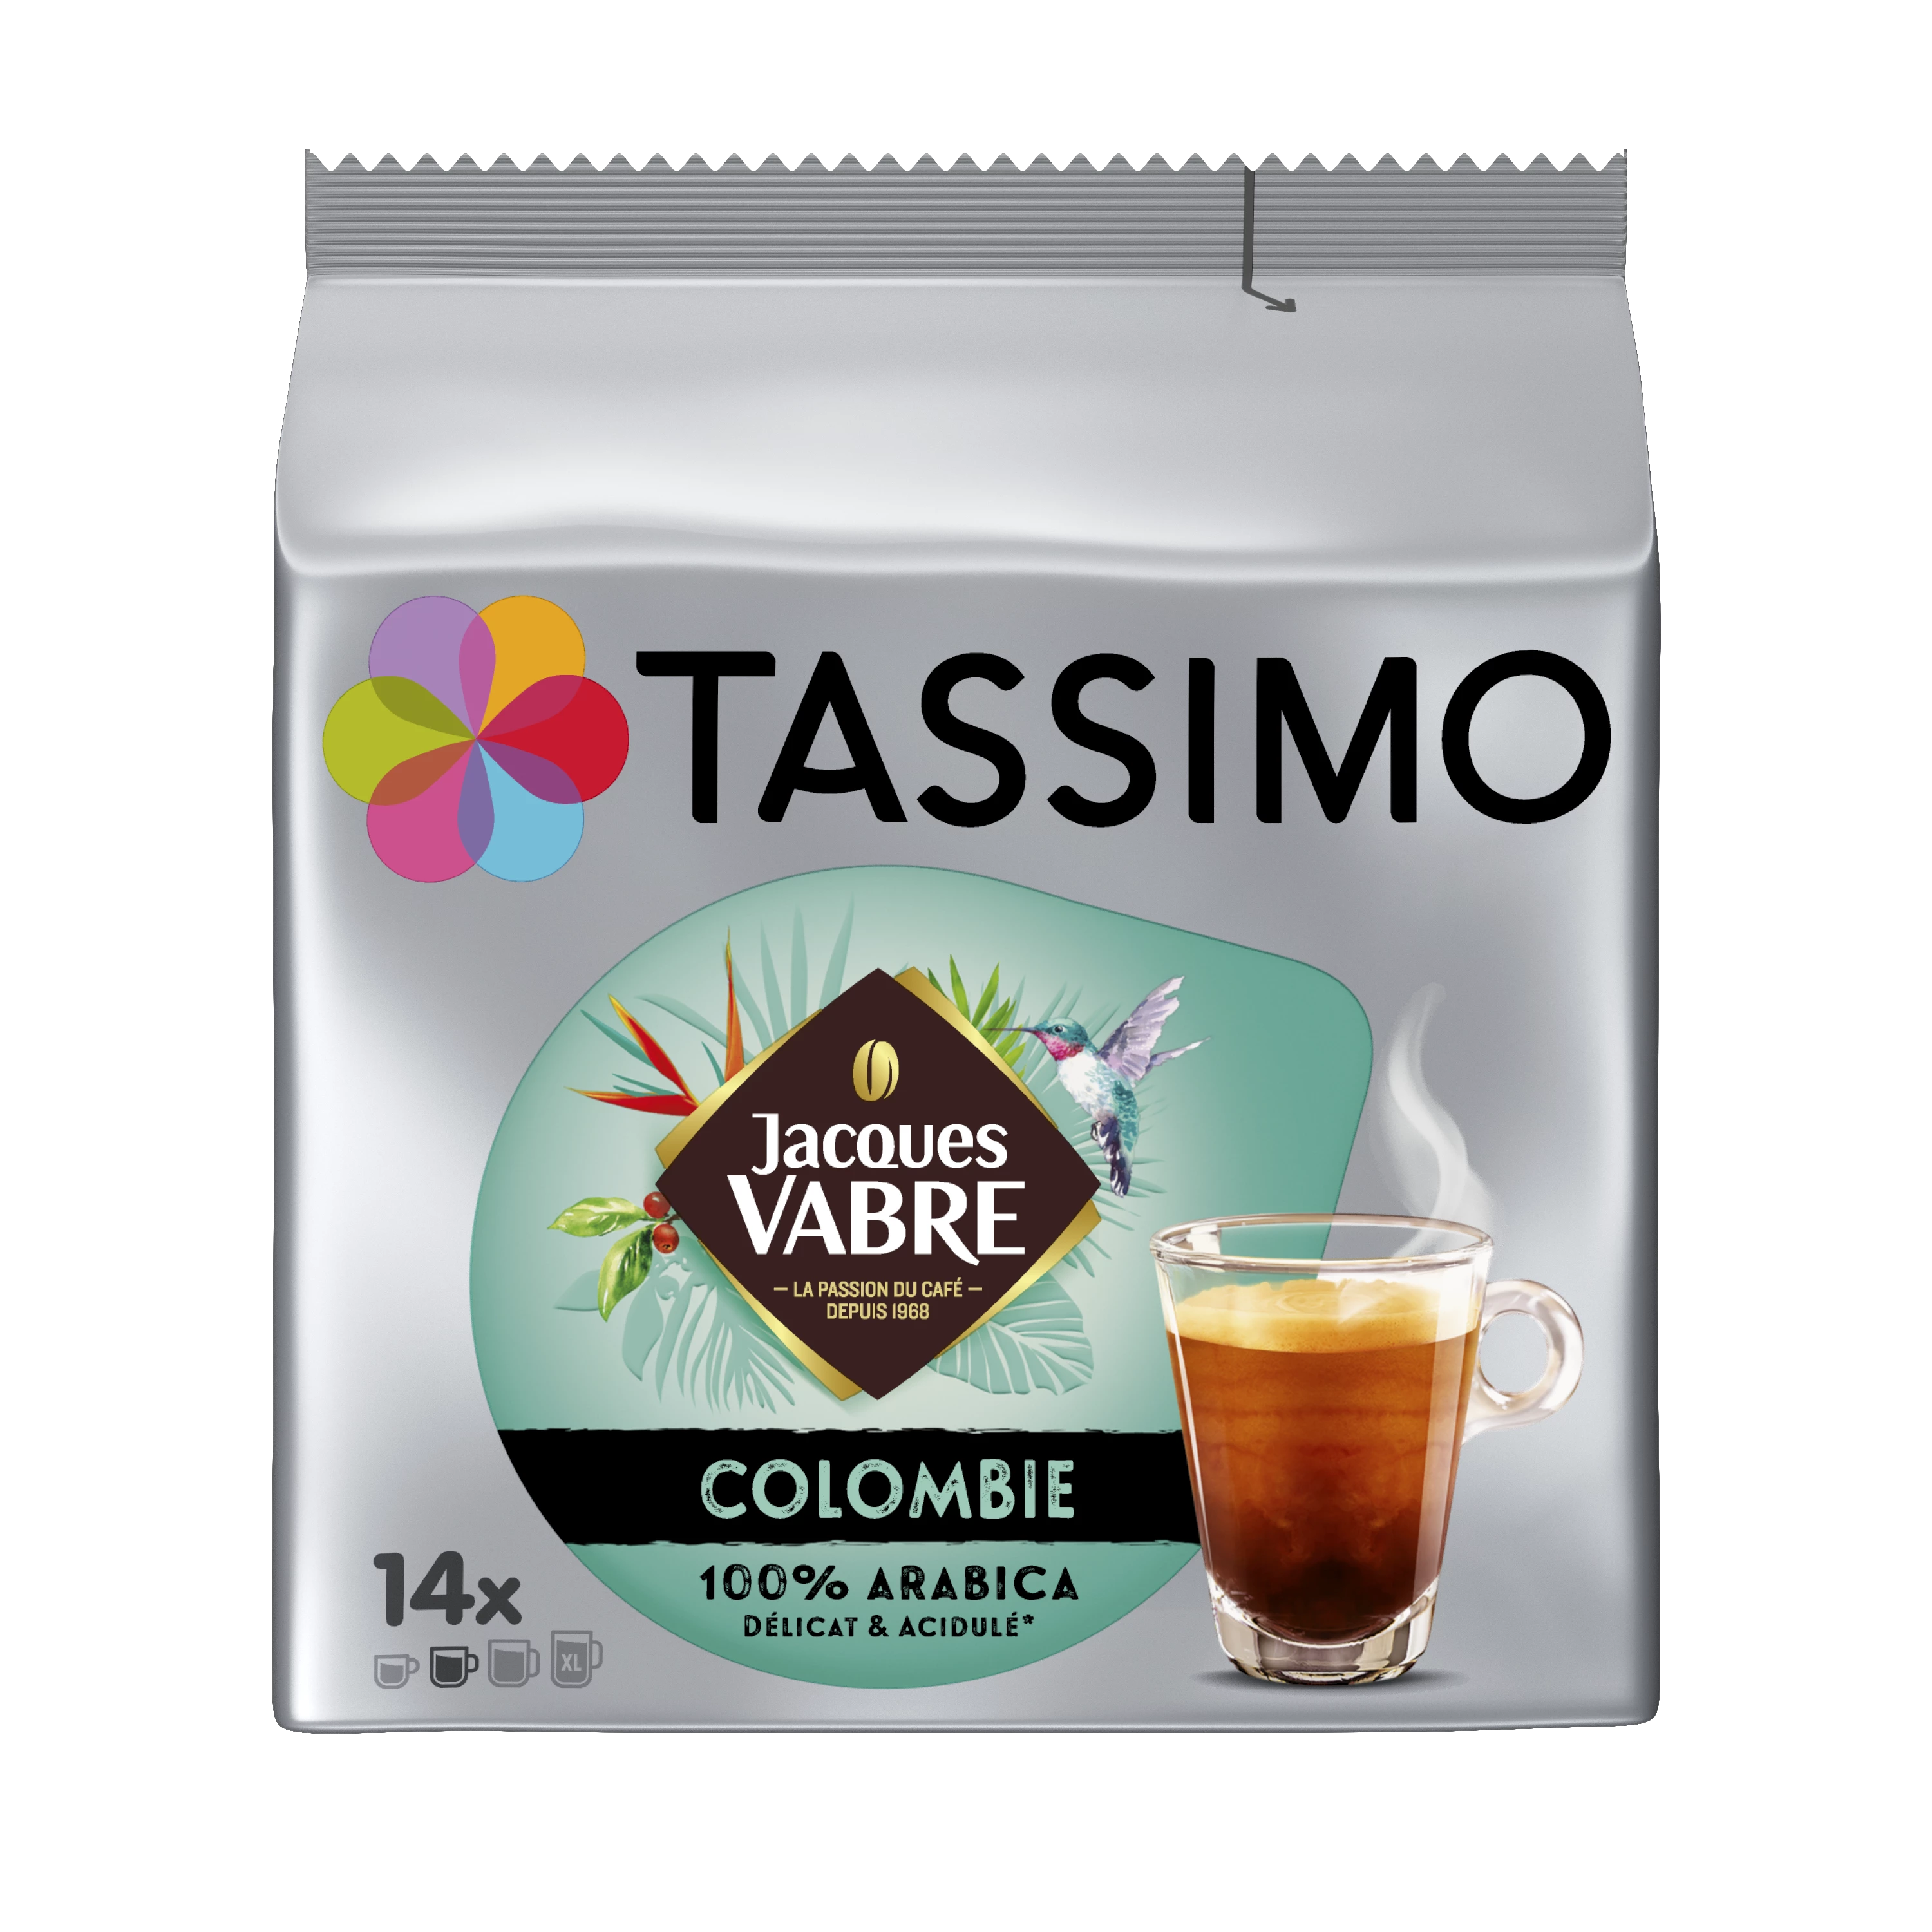 Jacques Vabre Colombia Coffee Pods X14 97g - TASSIMO